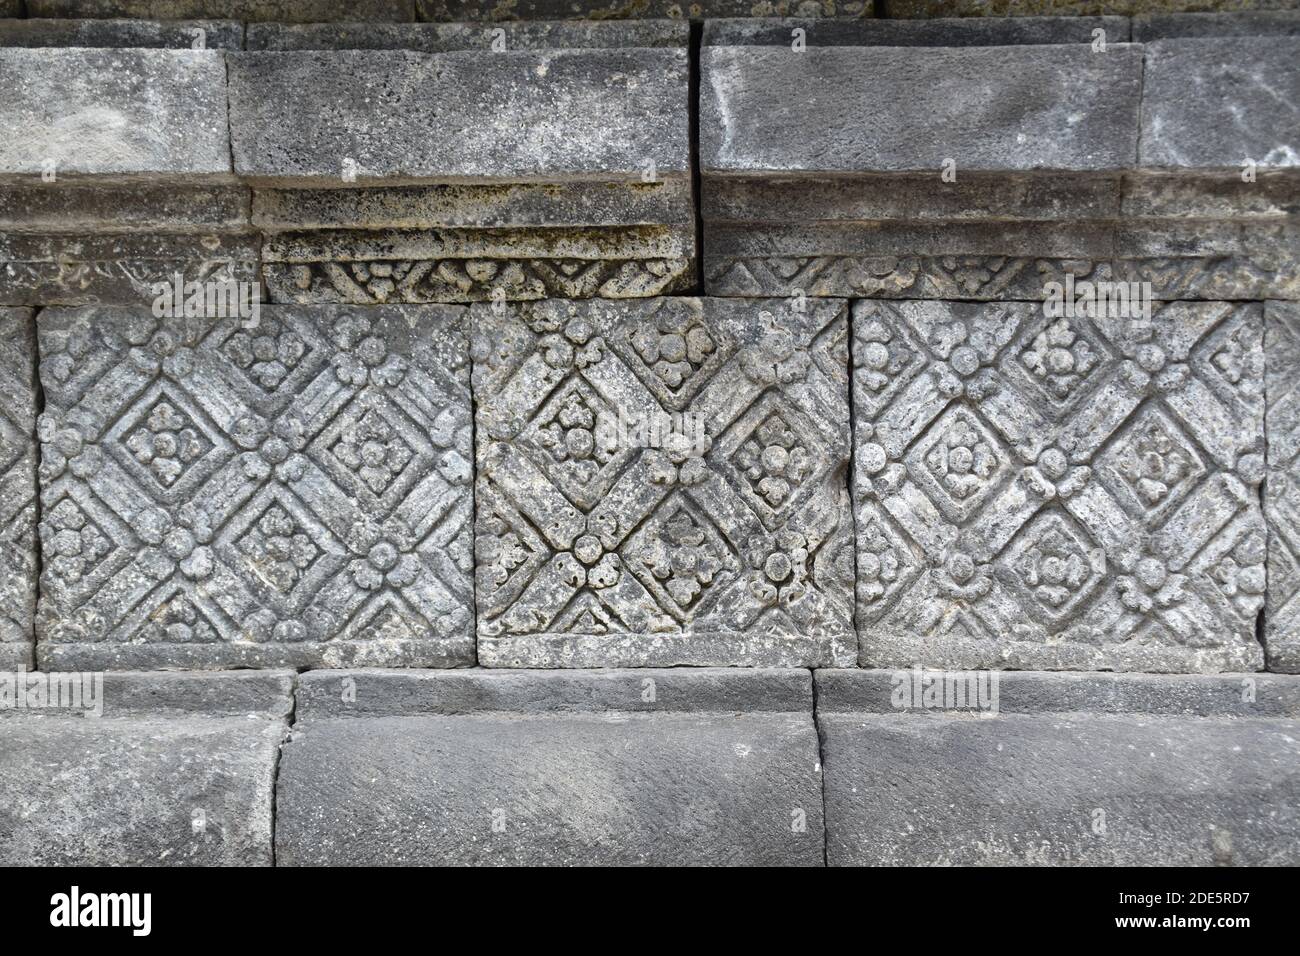 ancient art patterns on the walls of the main temple of the Sojiwan Temple complex in Central Java, Indonesia Stock Photo